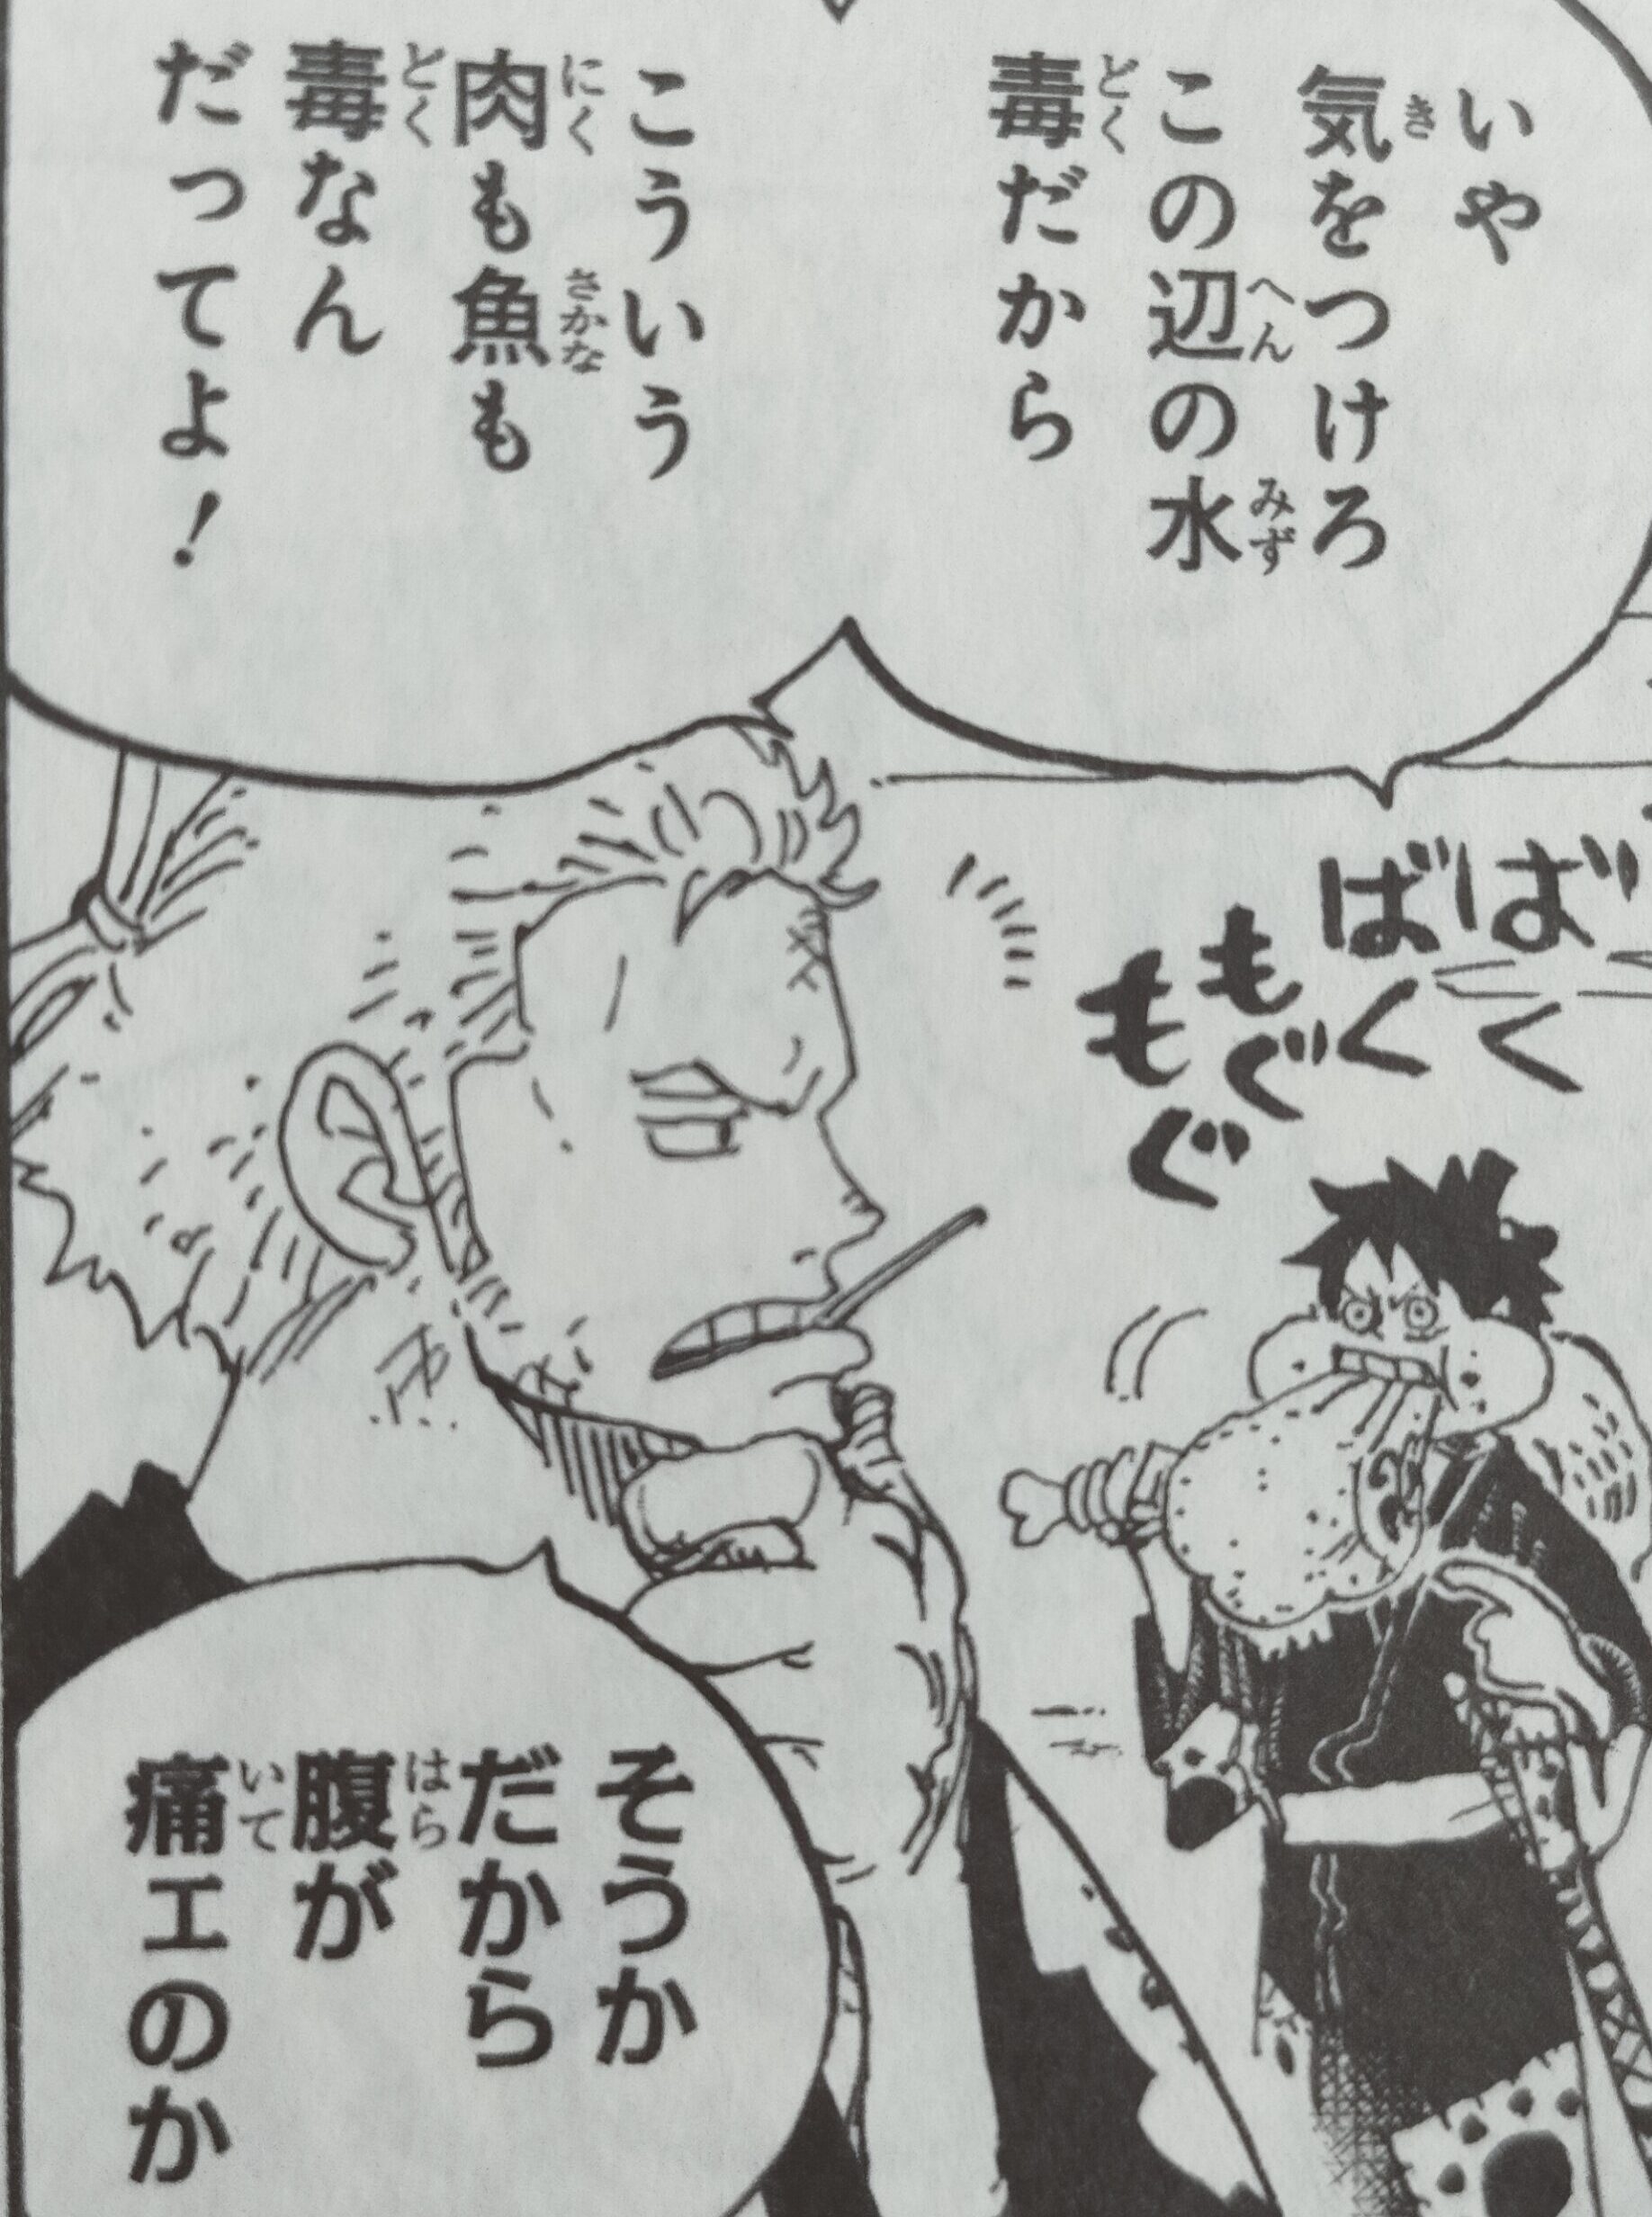 One Piece 91巻912話 編笠村ー飛徹の謎 は重要 ー 漫画5000ドットコム